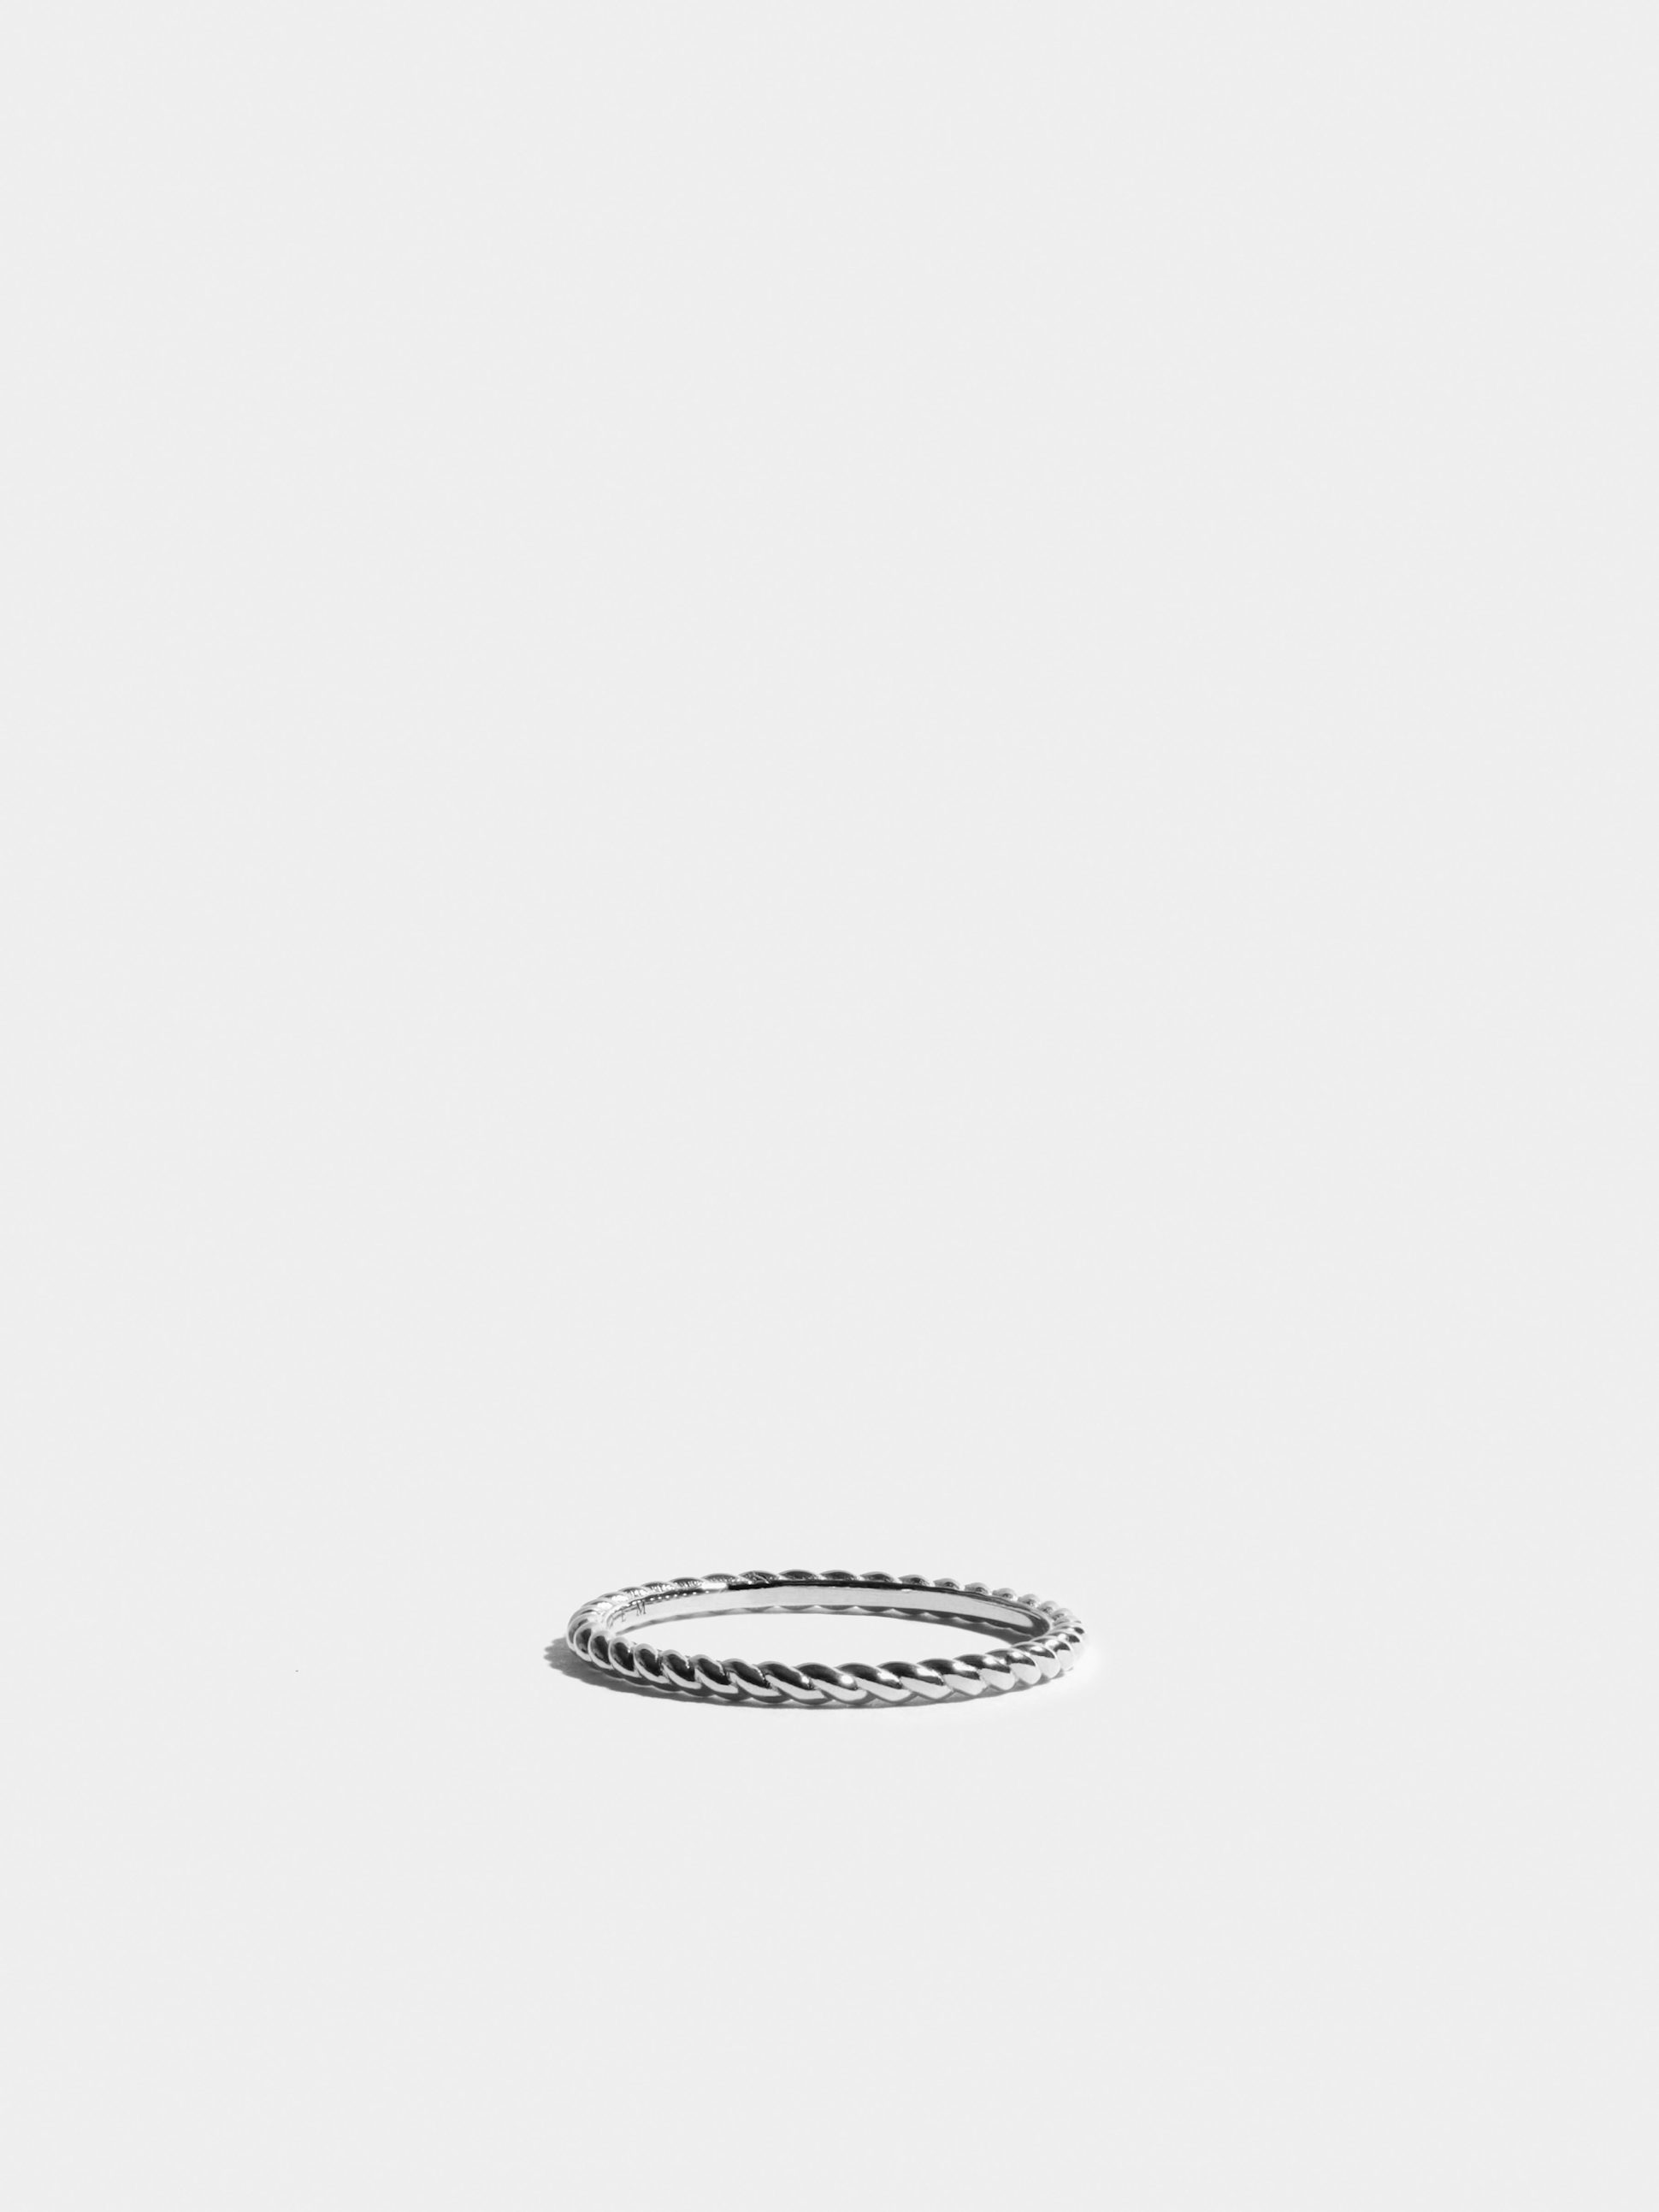 Ring Anagramme twisted in white gold 18k Fairmined ethical